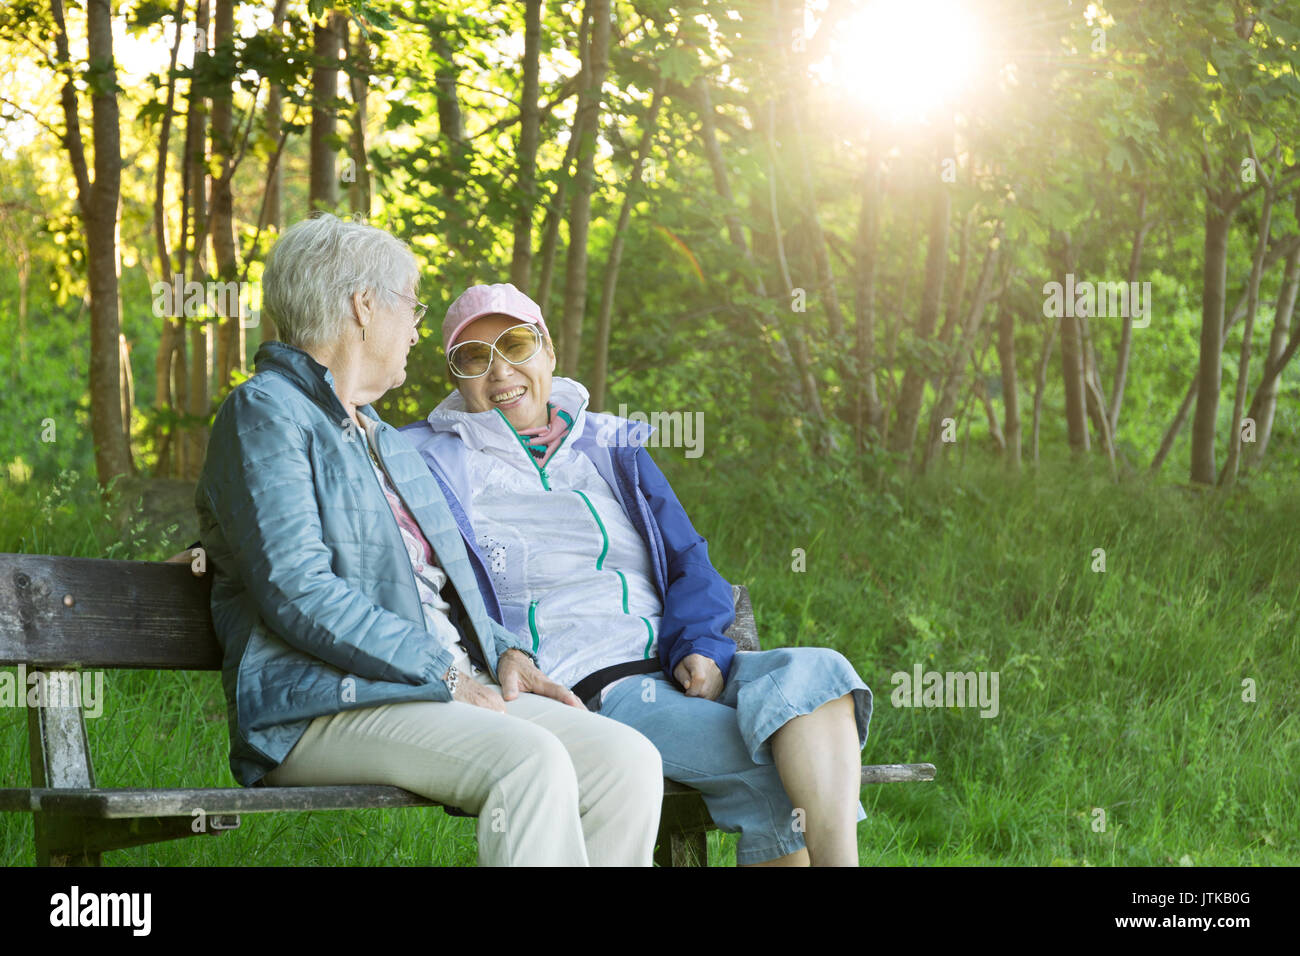 Senior Caucasian (Swedish) woman on a park bench sharing a happy moment with her Asian (Taiwanese, Chinese) daughter-in-law in the afternoon sun. Stock Photo